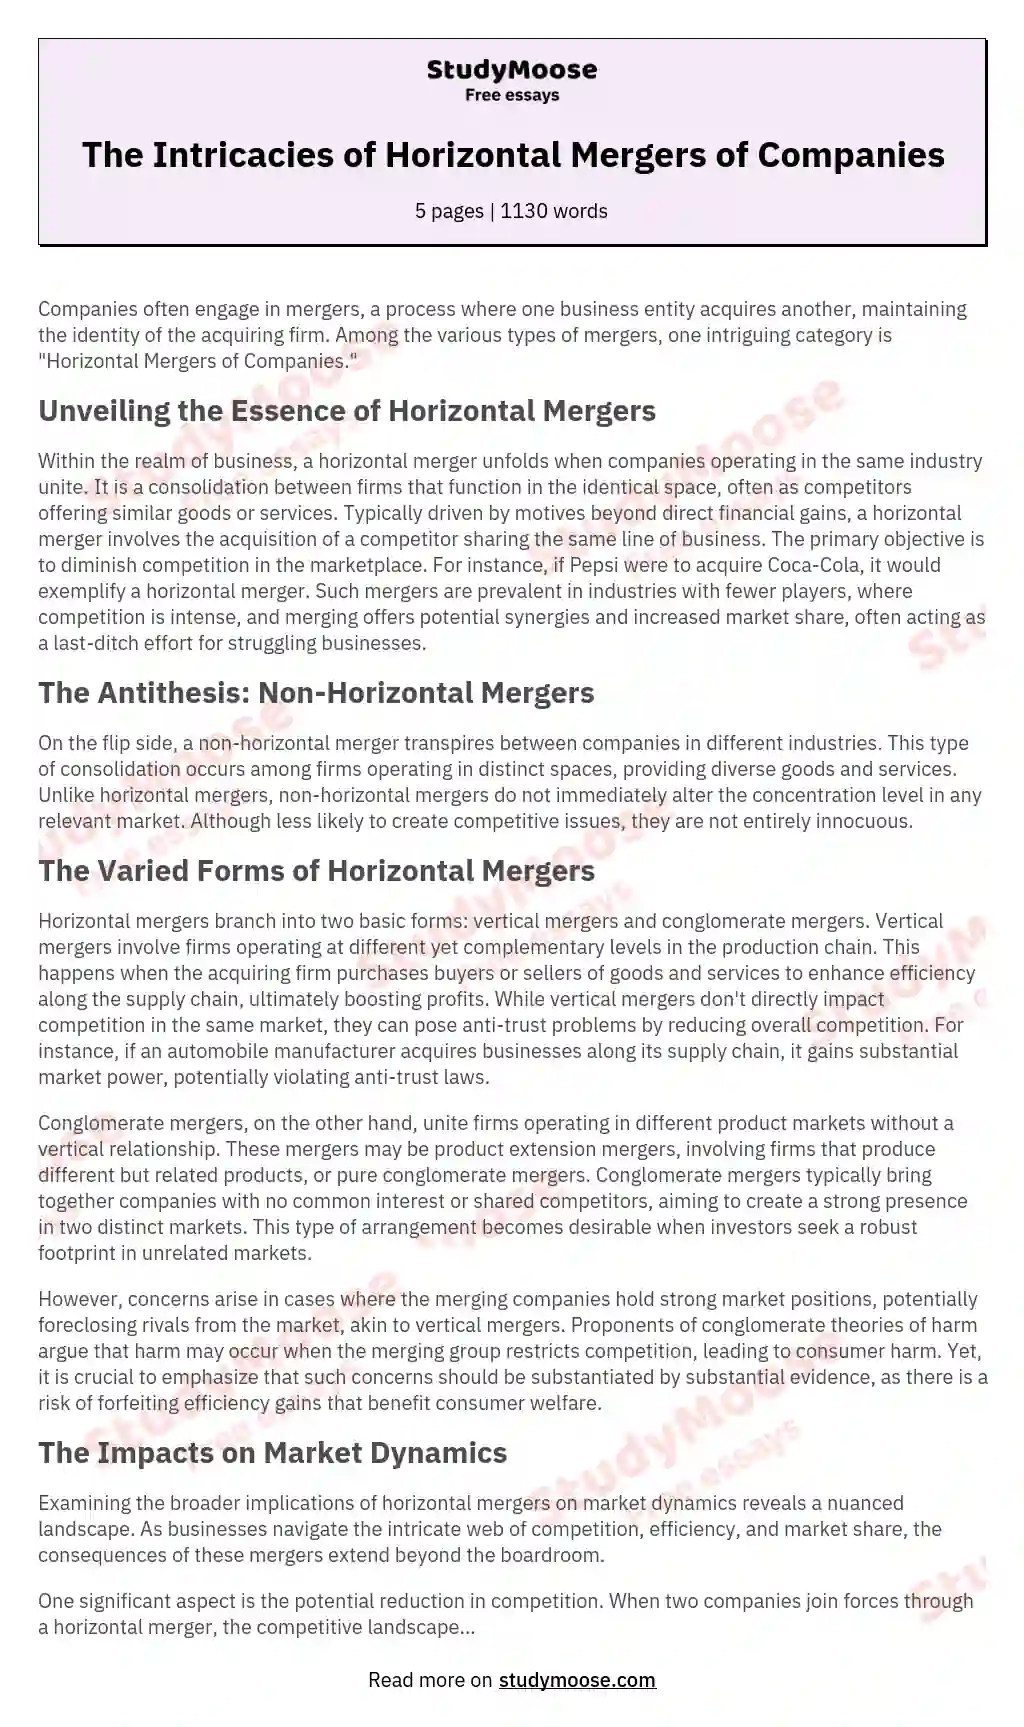 The Intricacies of Horizontal Mergers of Companies essay